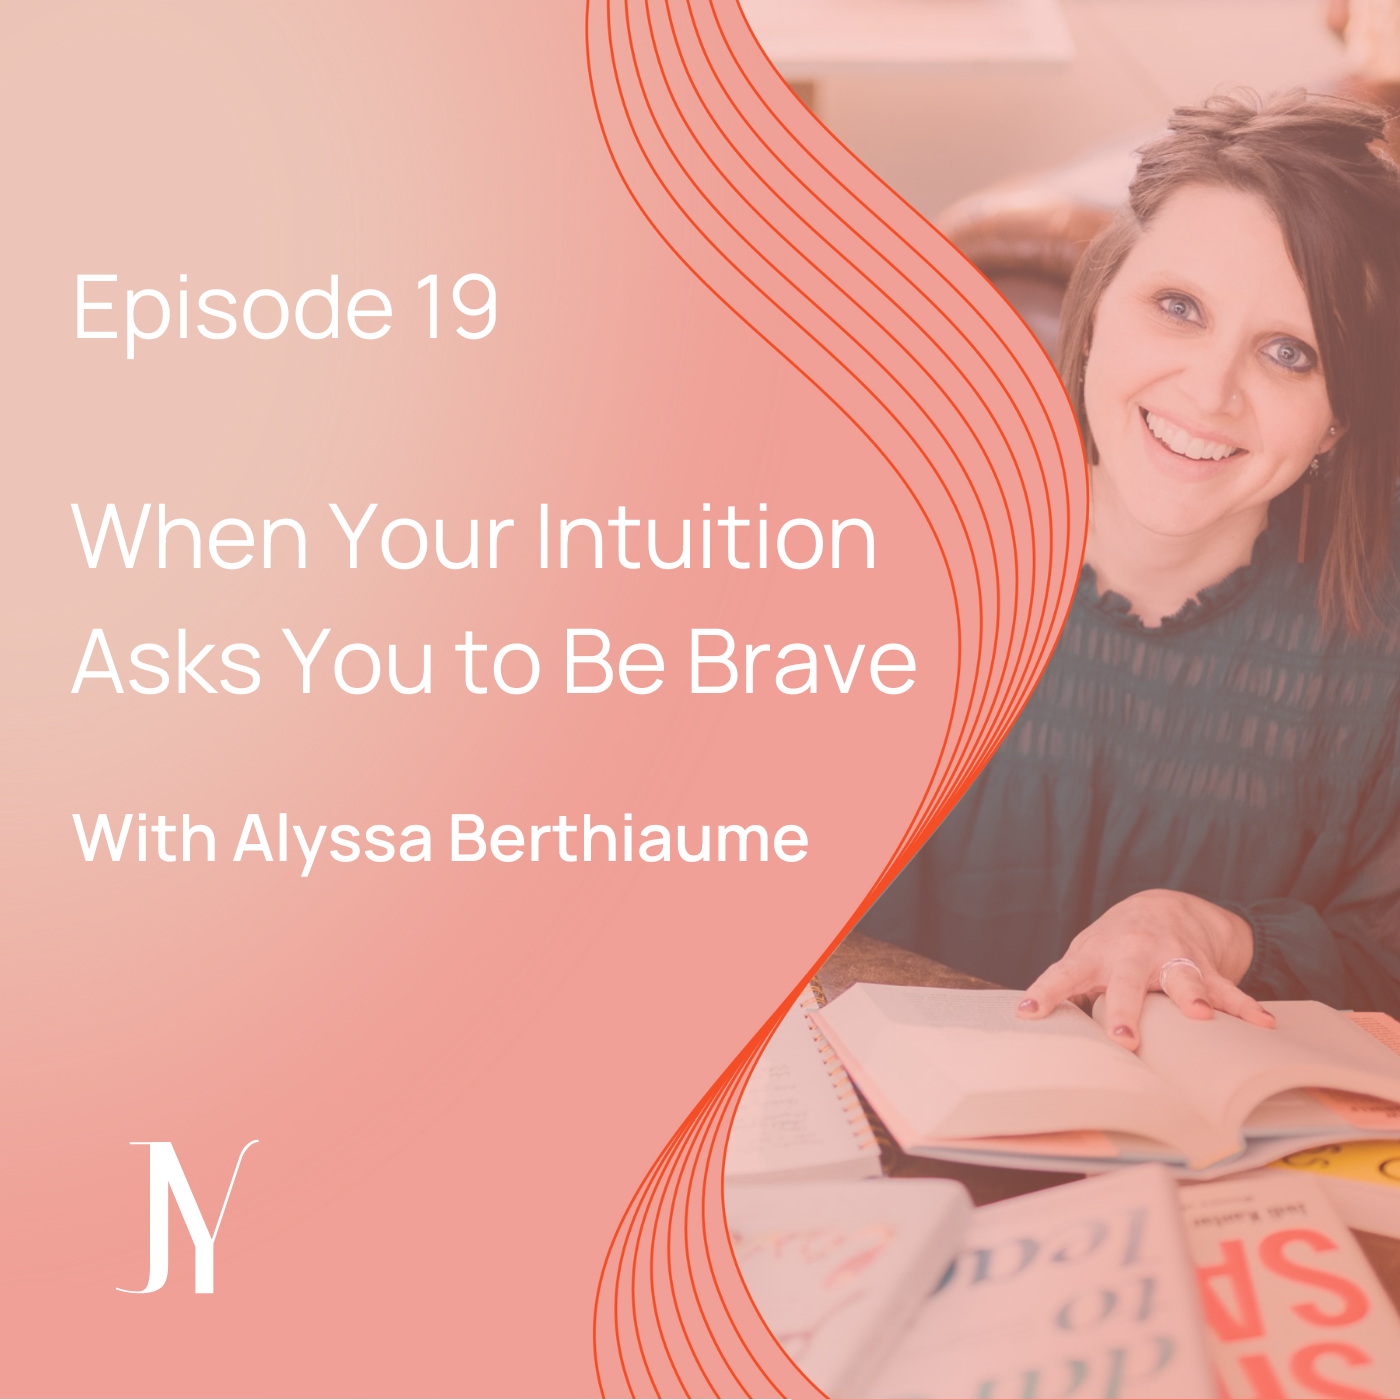 When-Your-Intuition-Asks-You-to-Be-Brave_Alyssa-Berthiaume_Jennifer-Jane-Young_Intuitive-Business